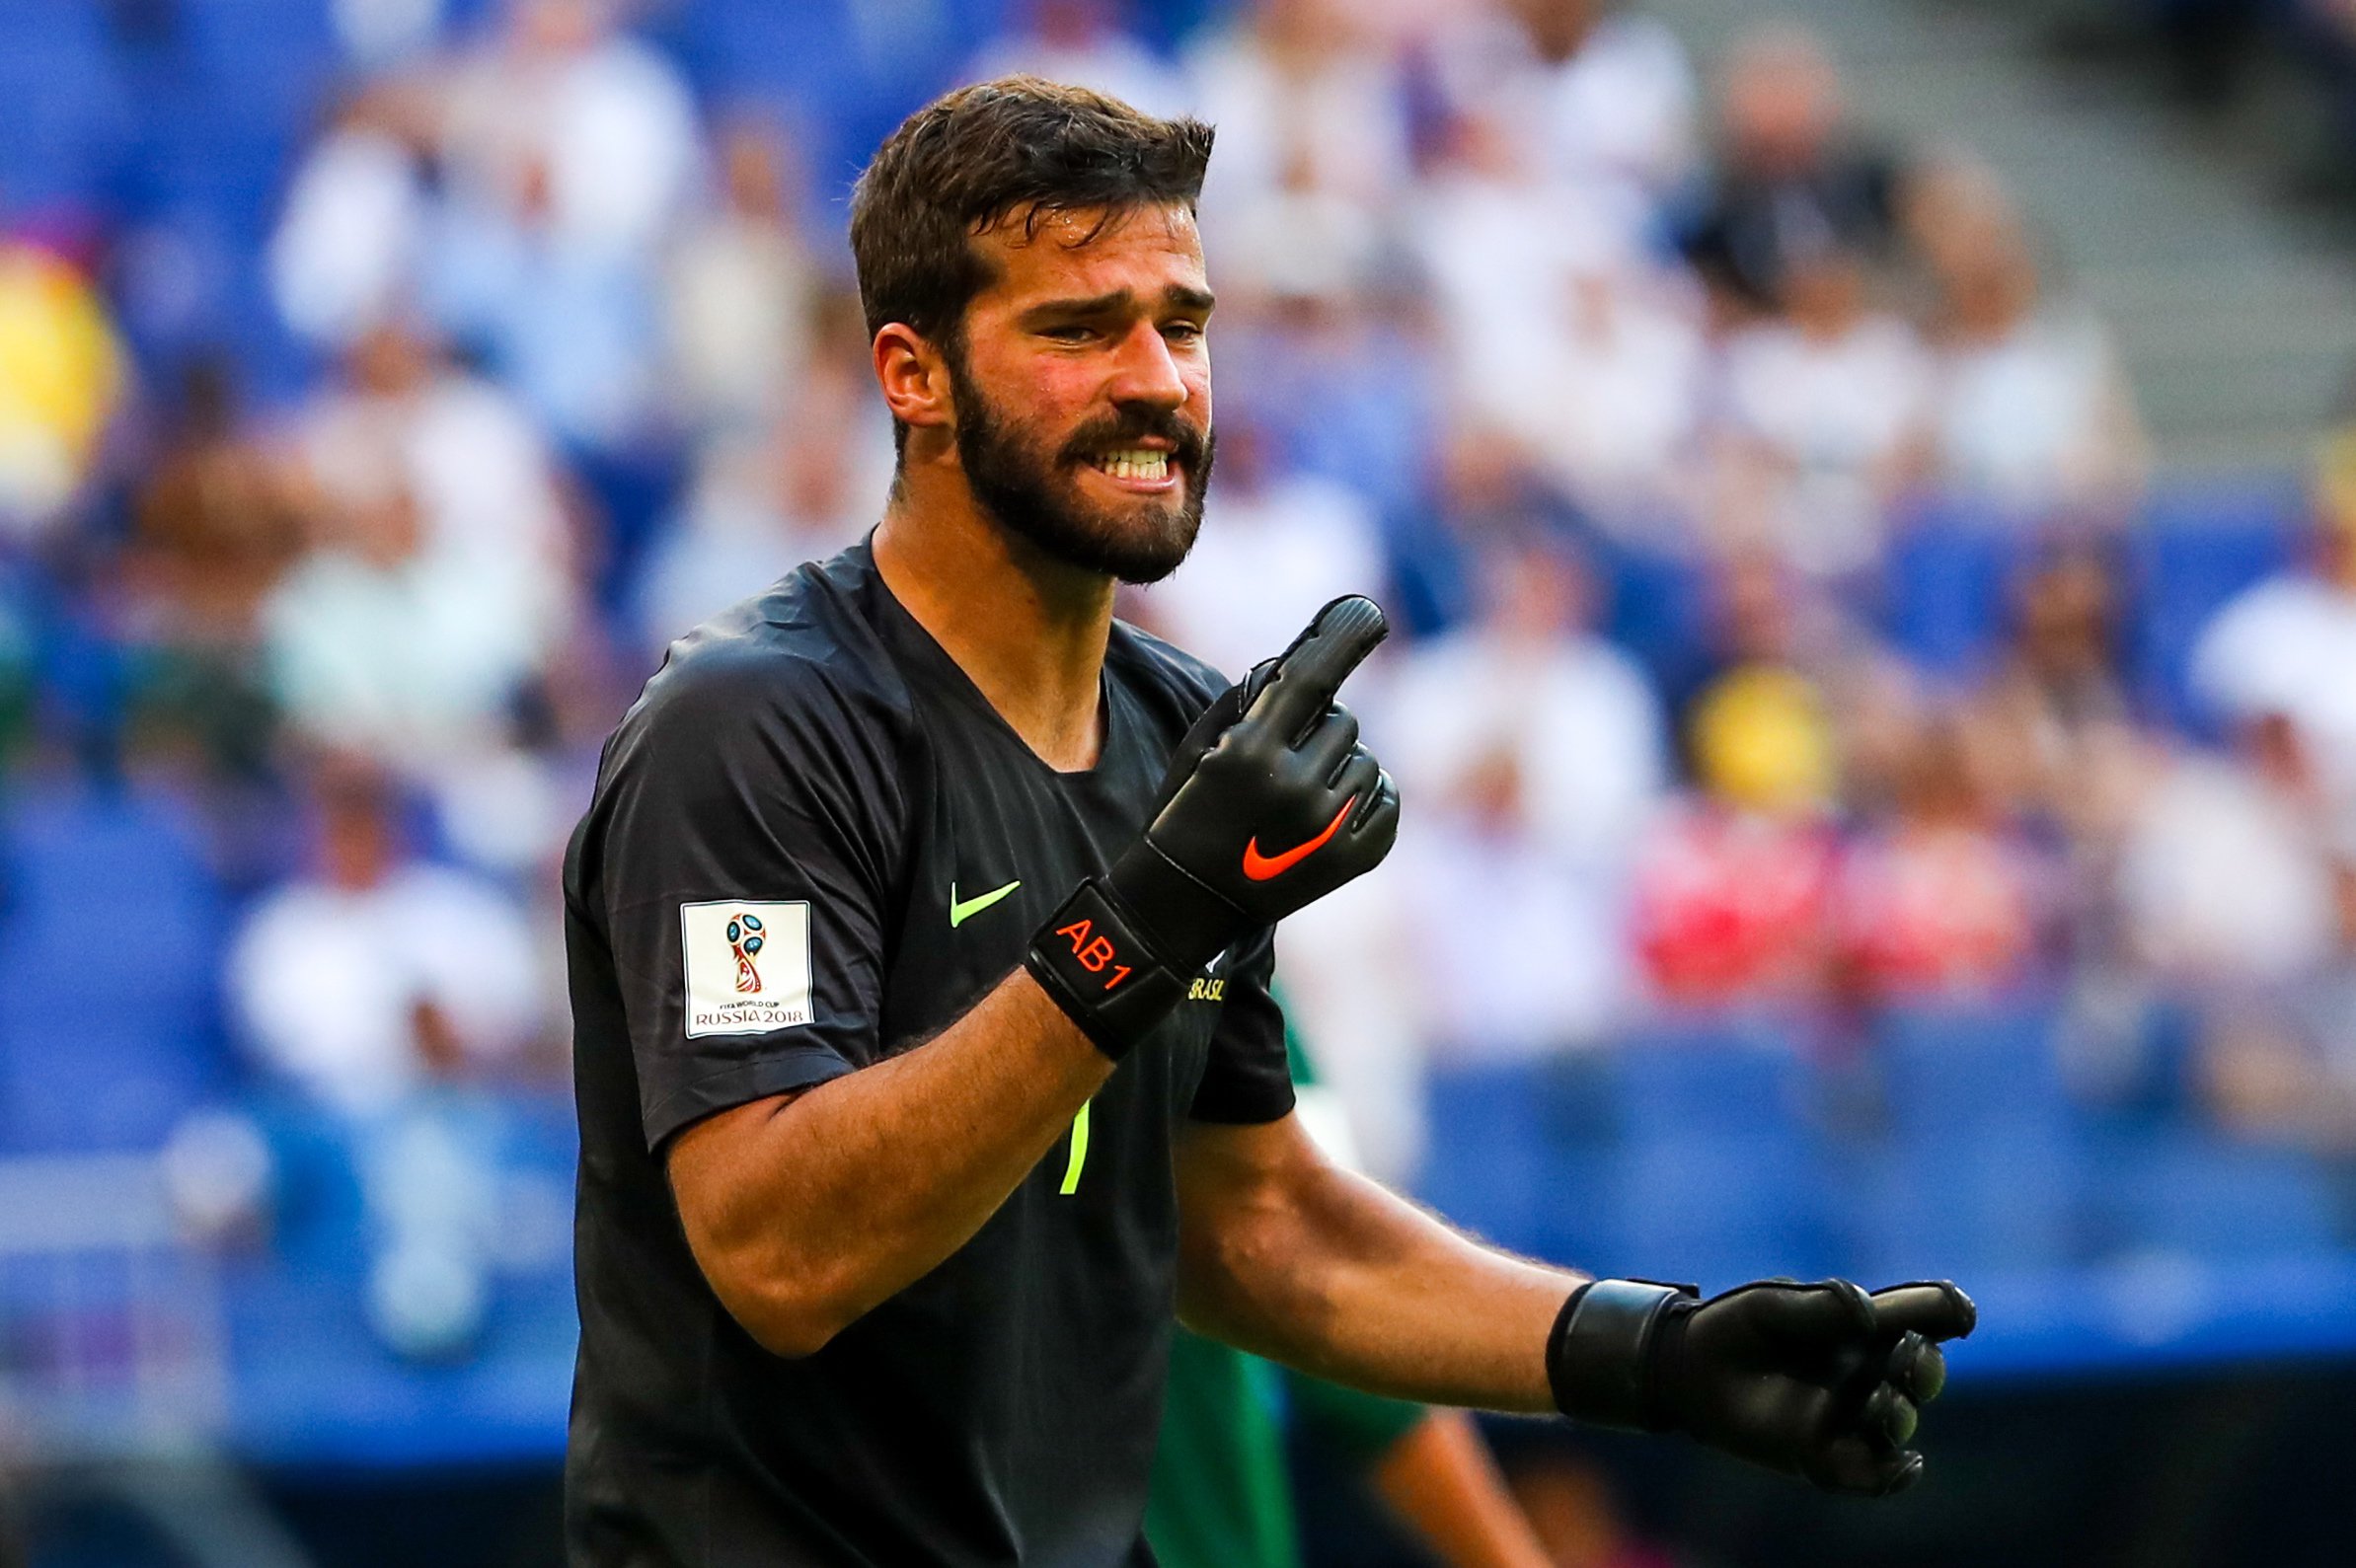 Chelsea close to signing Alisson after agreeing personal terms with £66m Roma goalkeeper